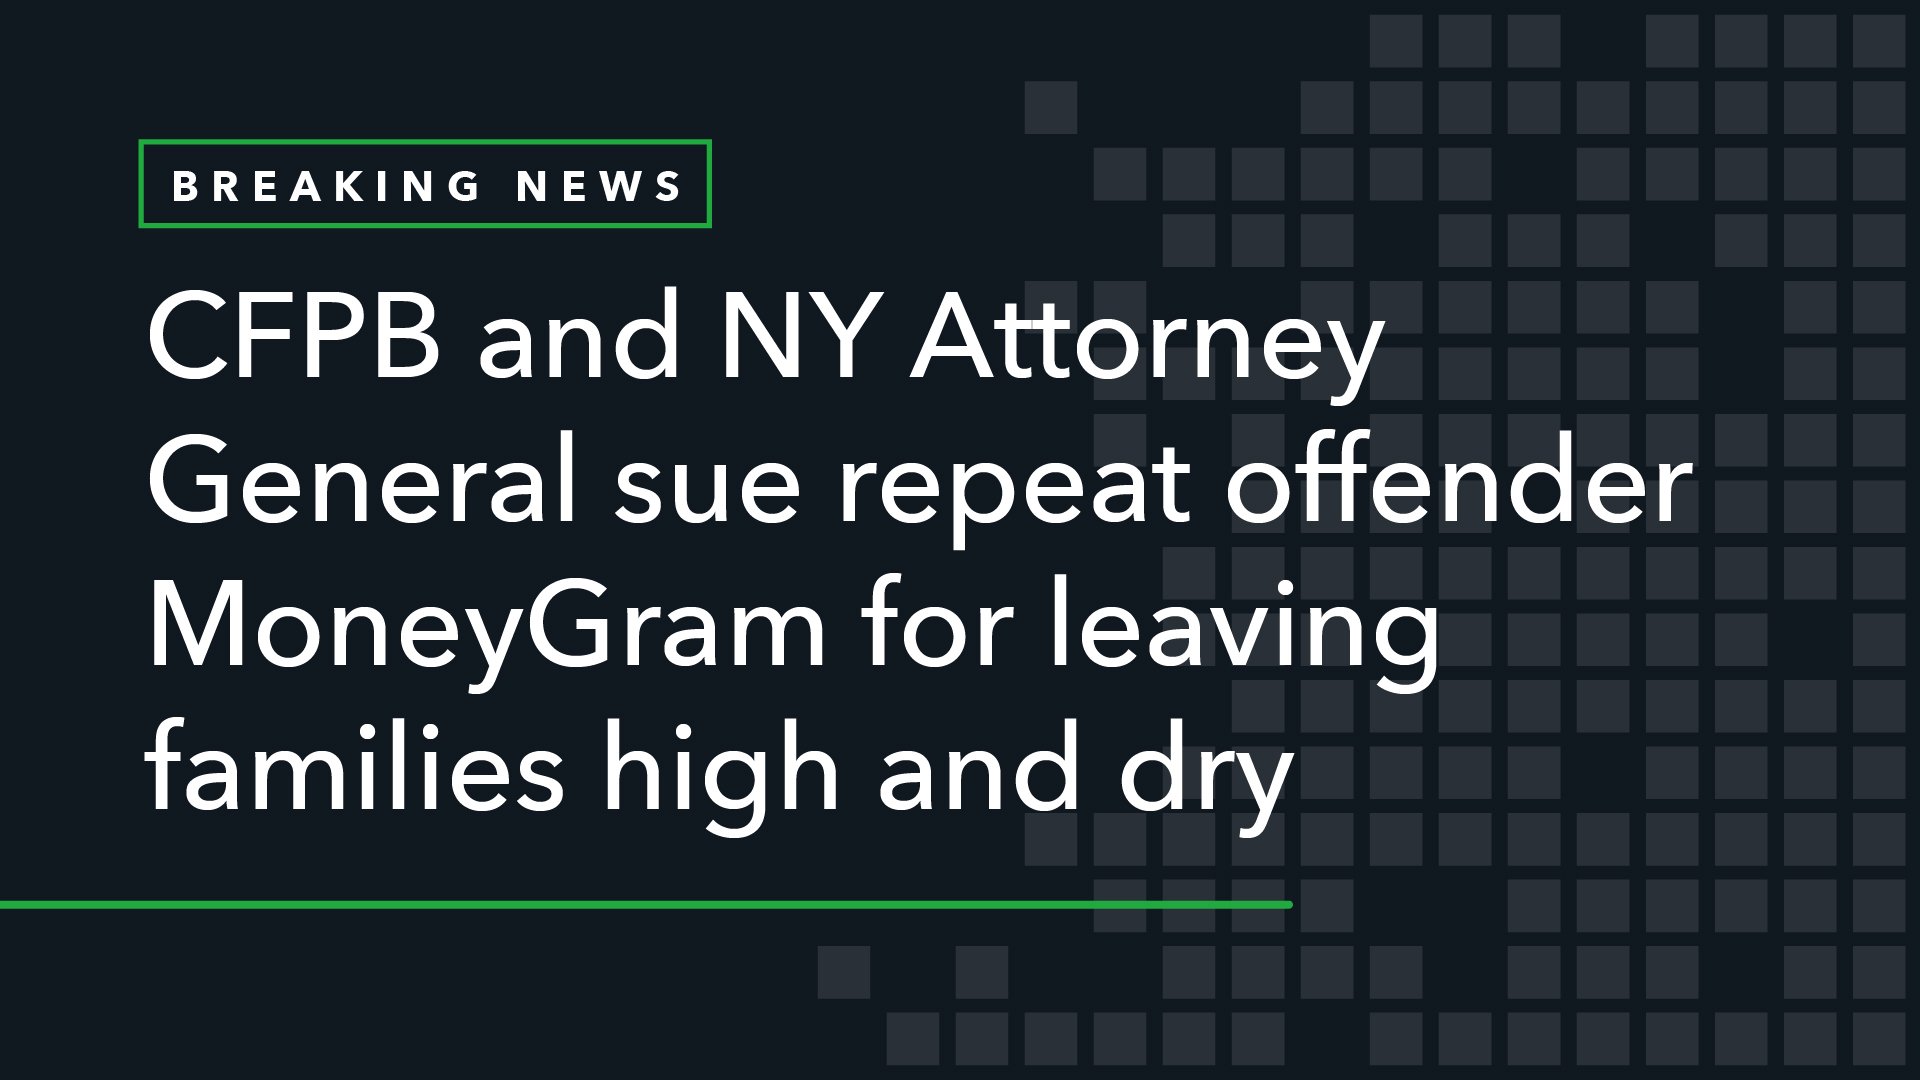 CFPB and NY Attorney General Sue Repeat Offender MoneyGram For Leaving Families High and Dry